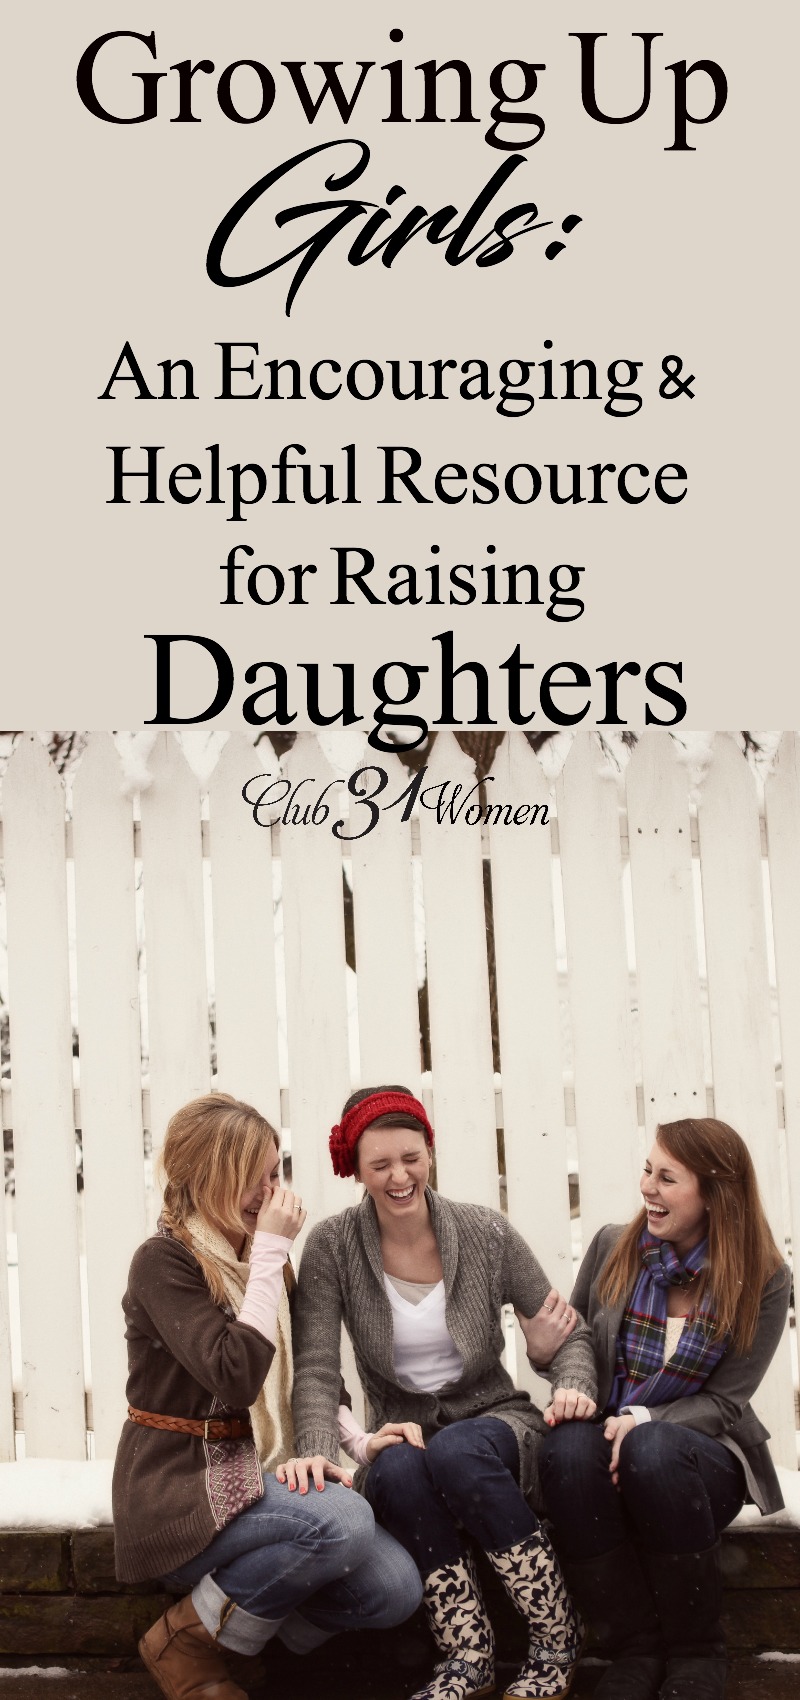 Got girls? Here's an encouraging and helpful resource for raising daughters! Shared from the heart of a mom with four girls herself. via @Club31Women